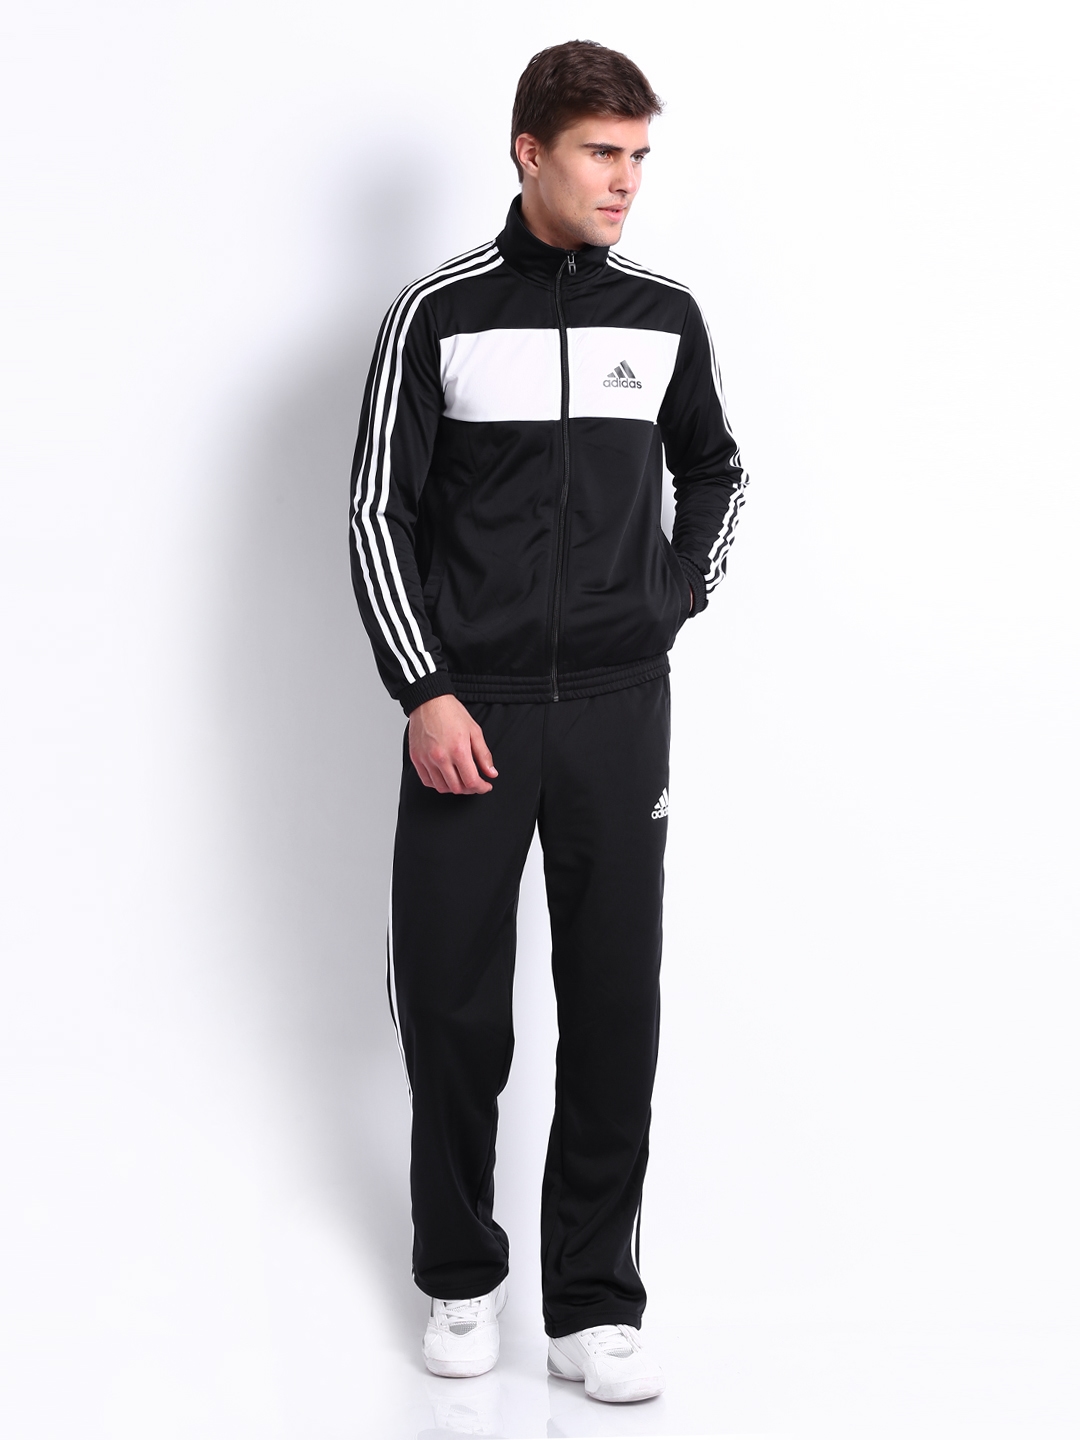 black and white adidas suit